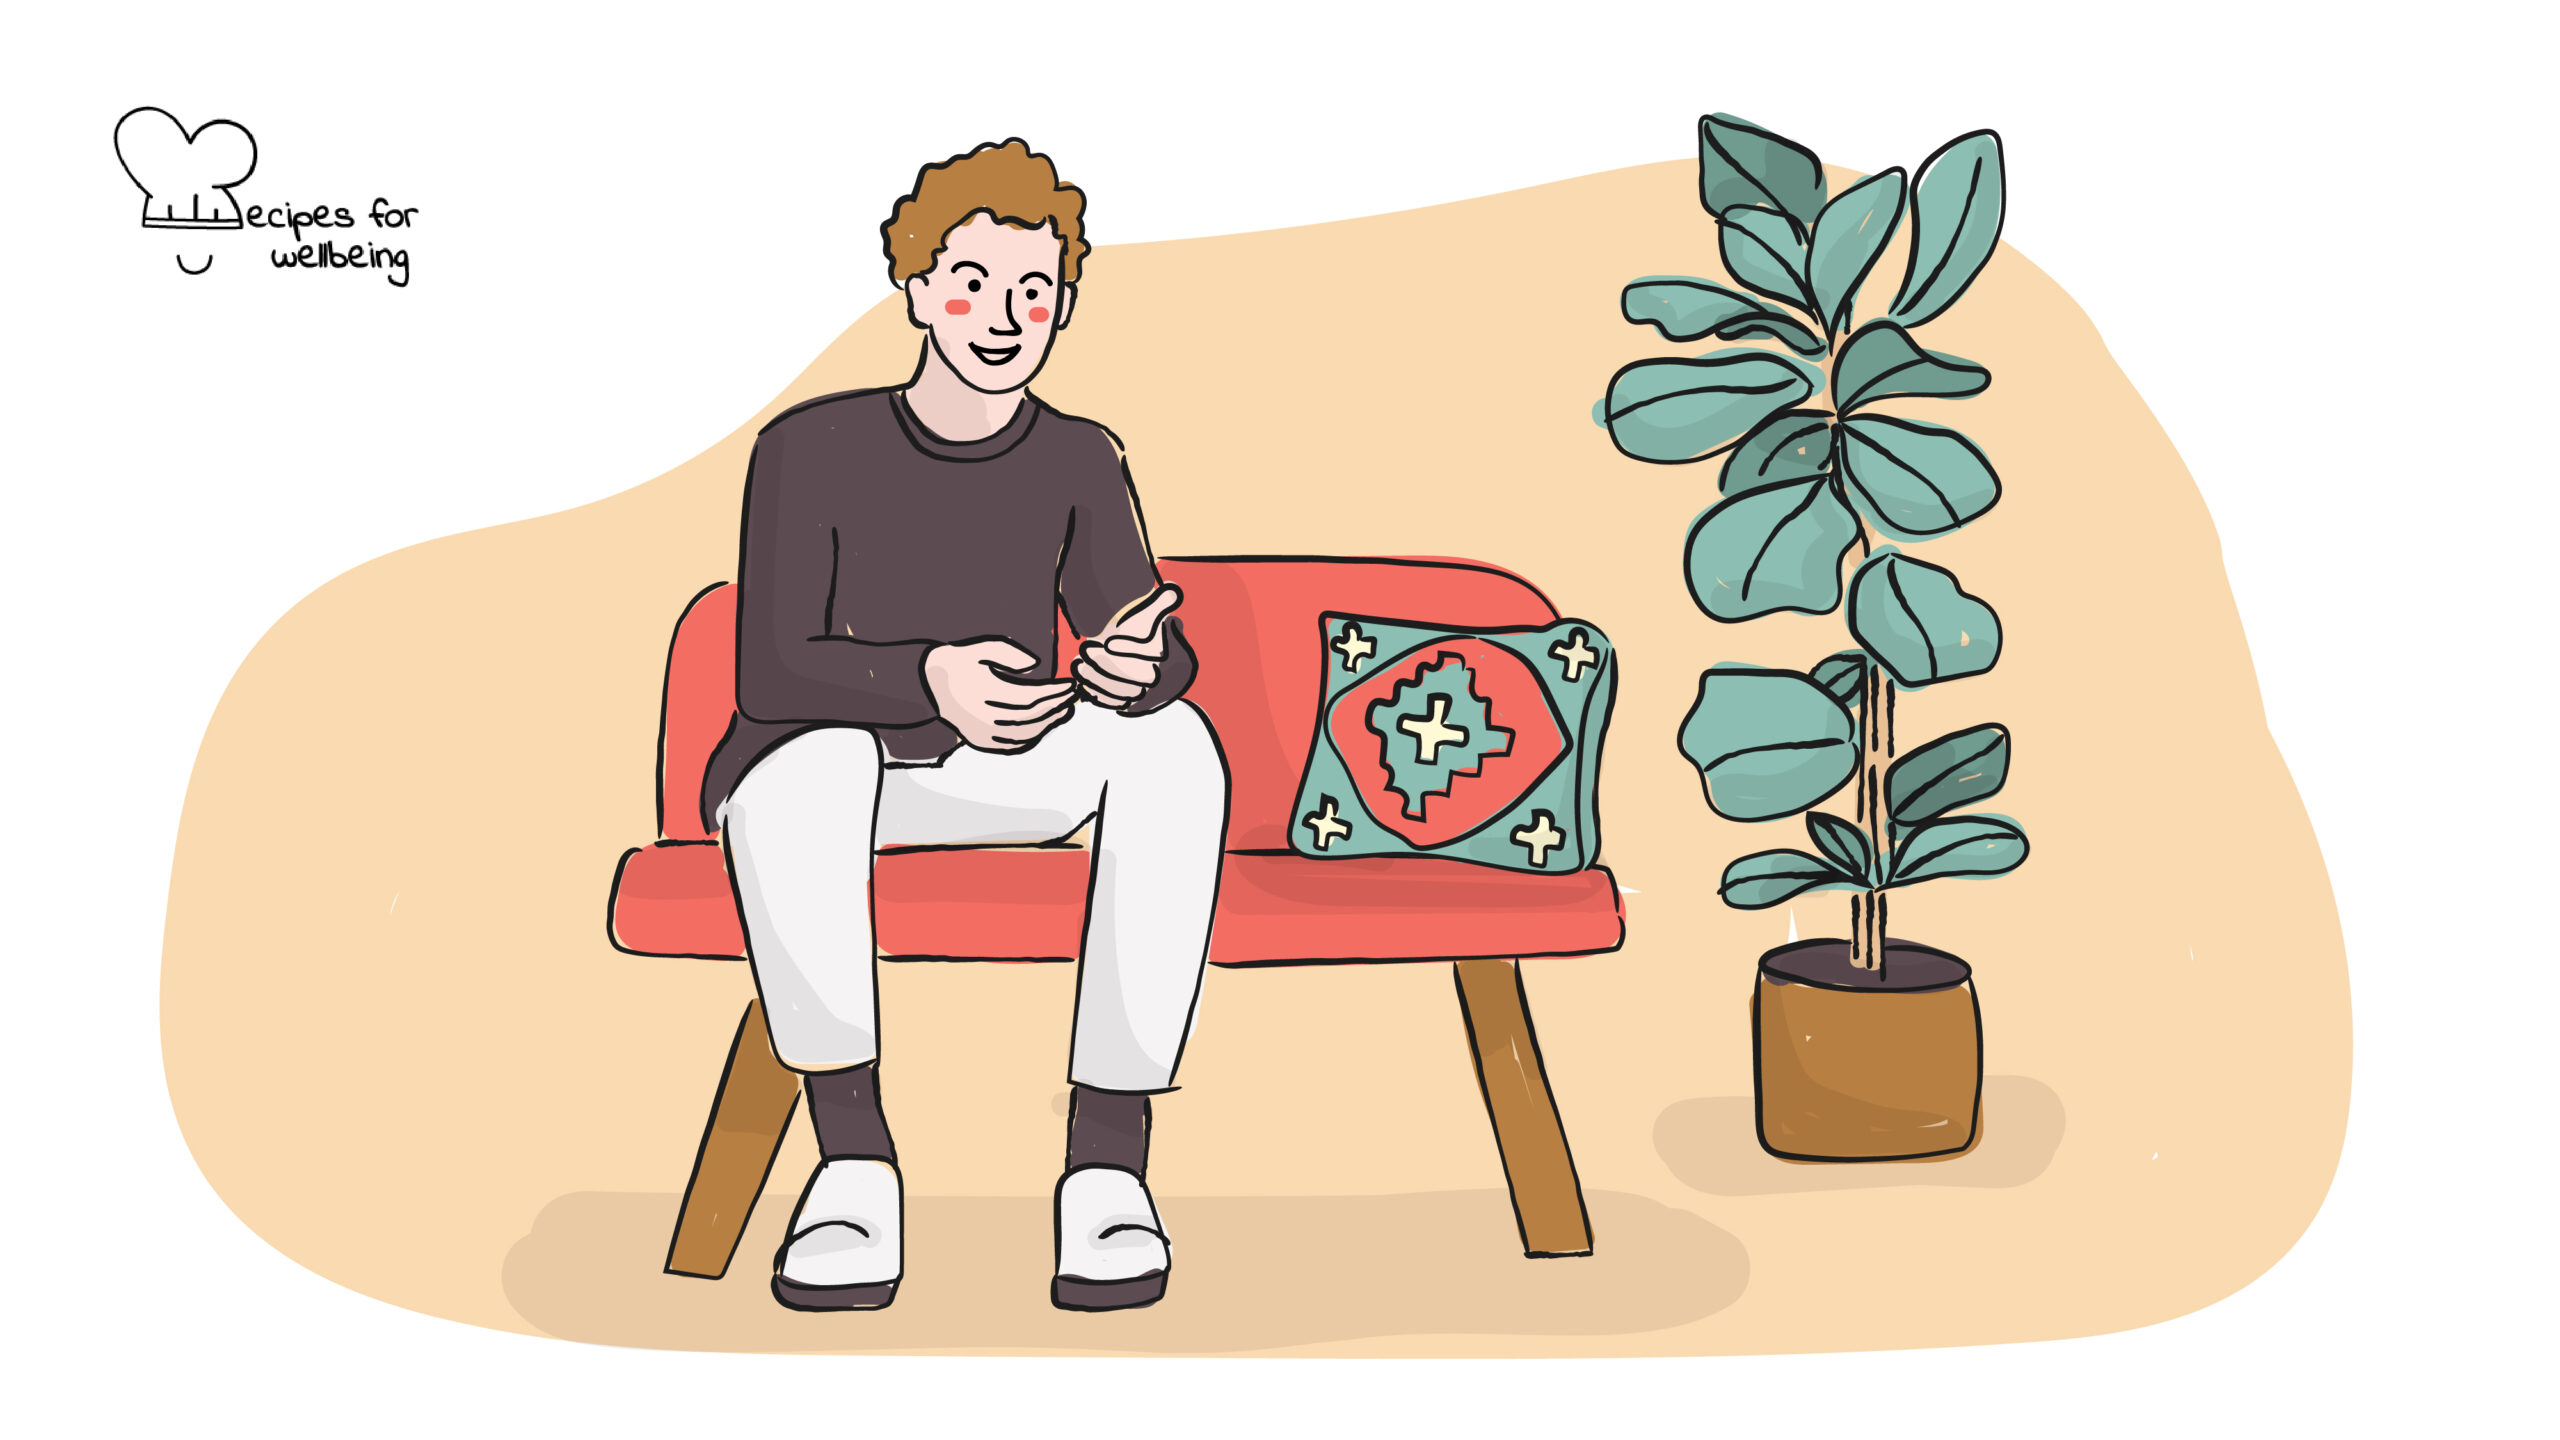 Illustration of a person sitting on a couch. © Recipes for Wellbeing